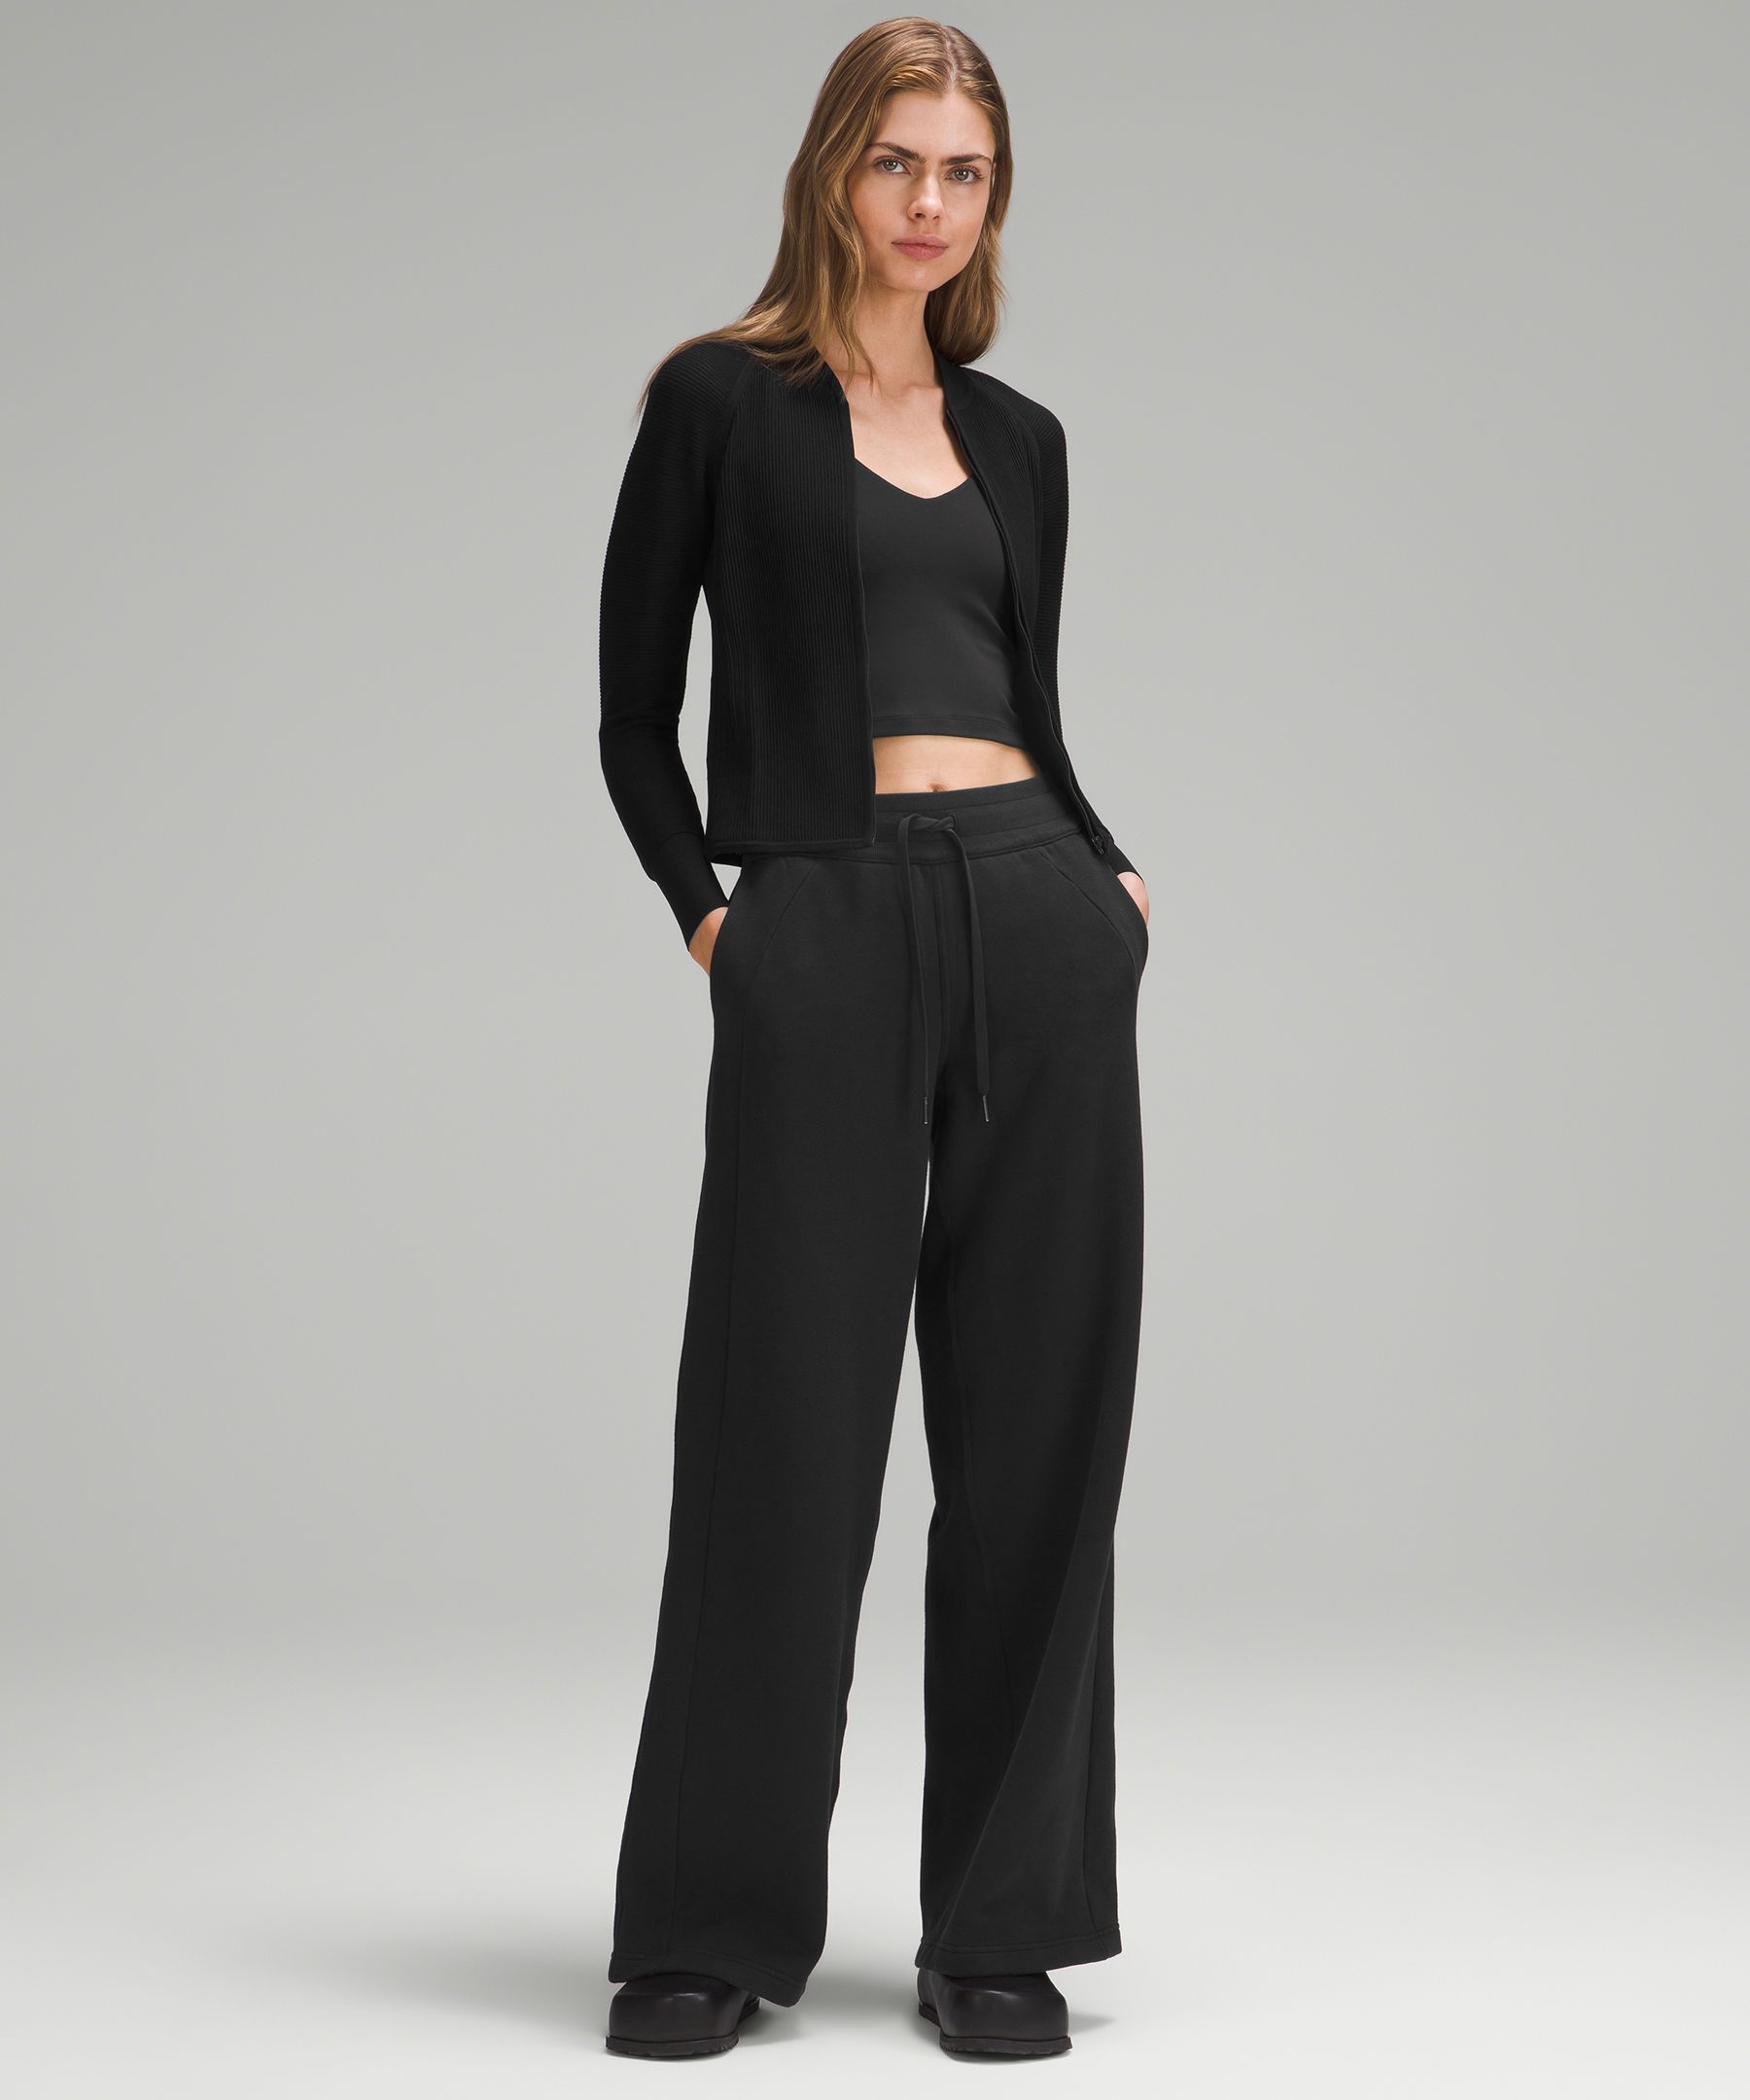 Lululemon Align Wide Leg Pants Brown Size 4 - $40 (59% Off Retail) - From  Brittany